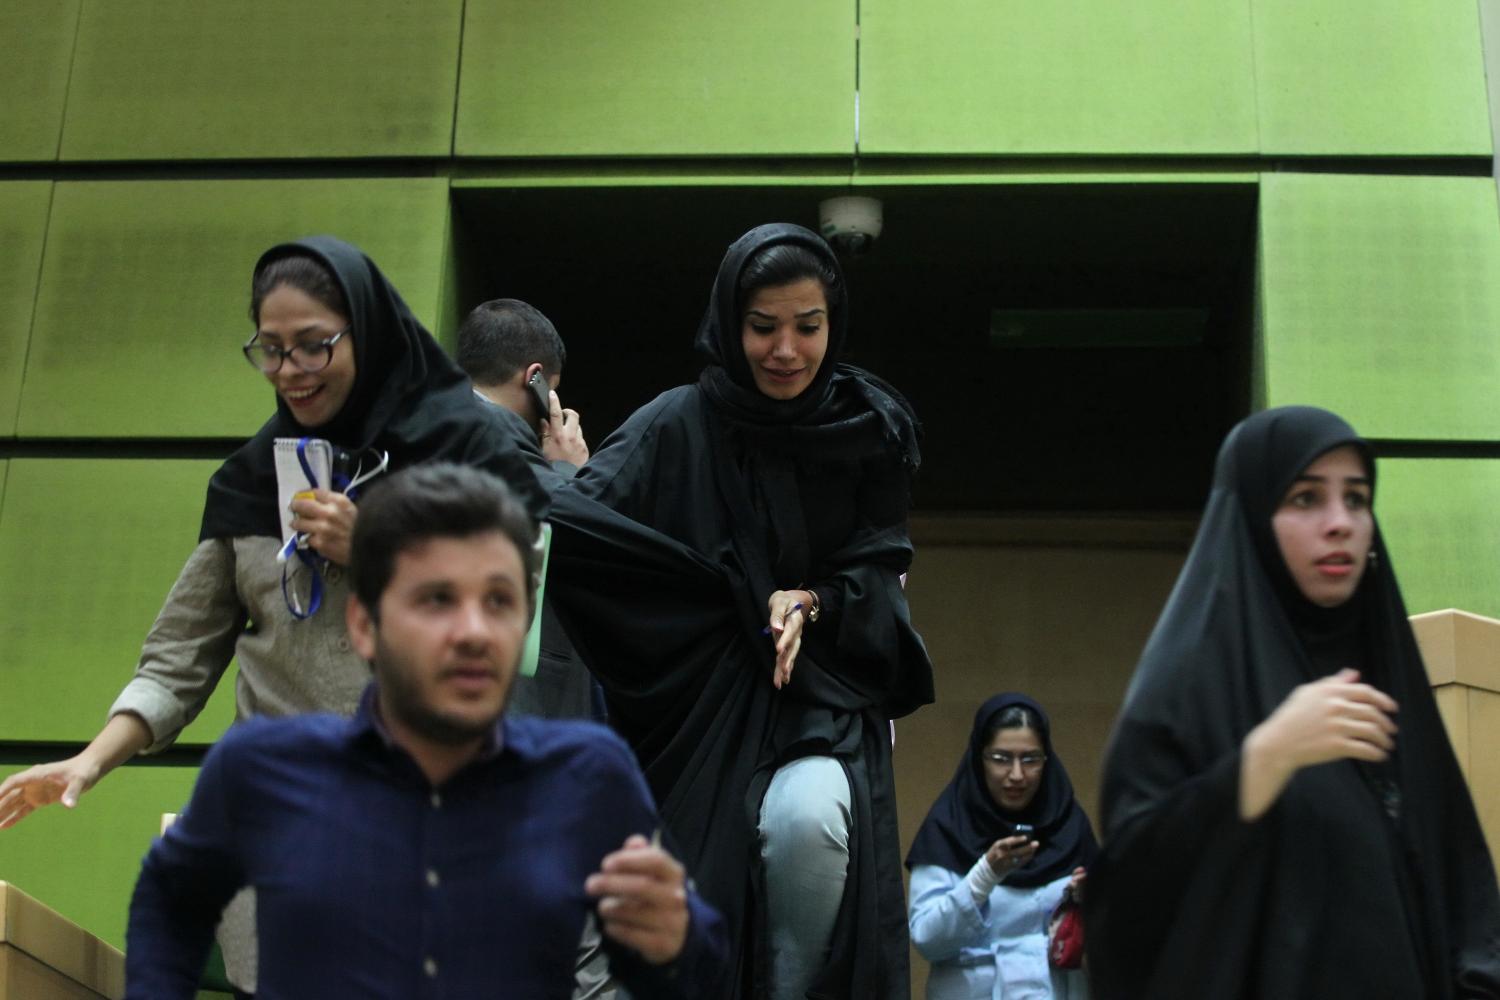 Women are seen inside the parliament during an attack in central Tehran, Iran, June 7, 2017. TIMA via REUTERS ATTENTION EDITORS - THIS IMAGE WAS PROVIDED BY A THIRD PARTY. FOR EDITORIAL USE ONLY. - RTX39FJN